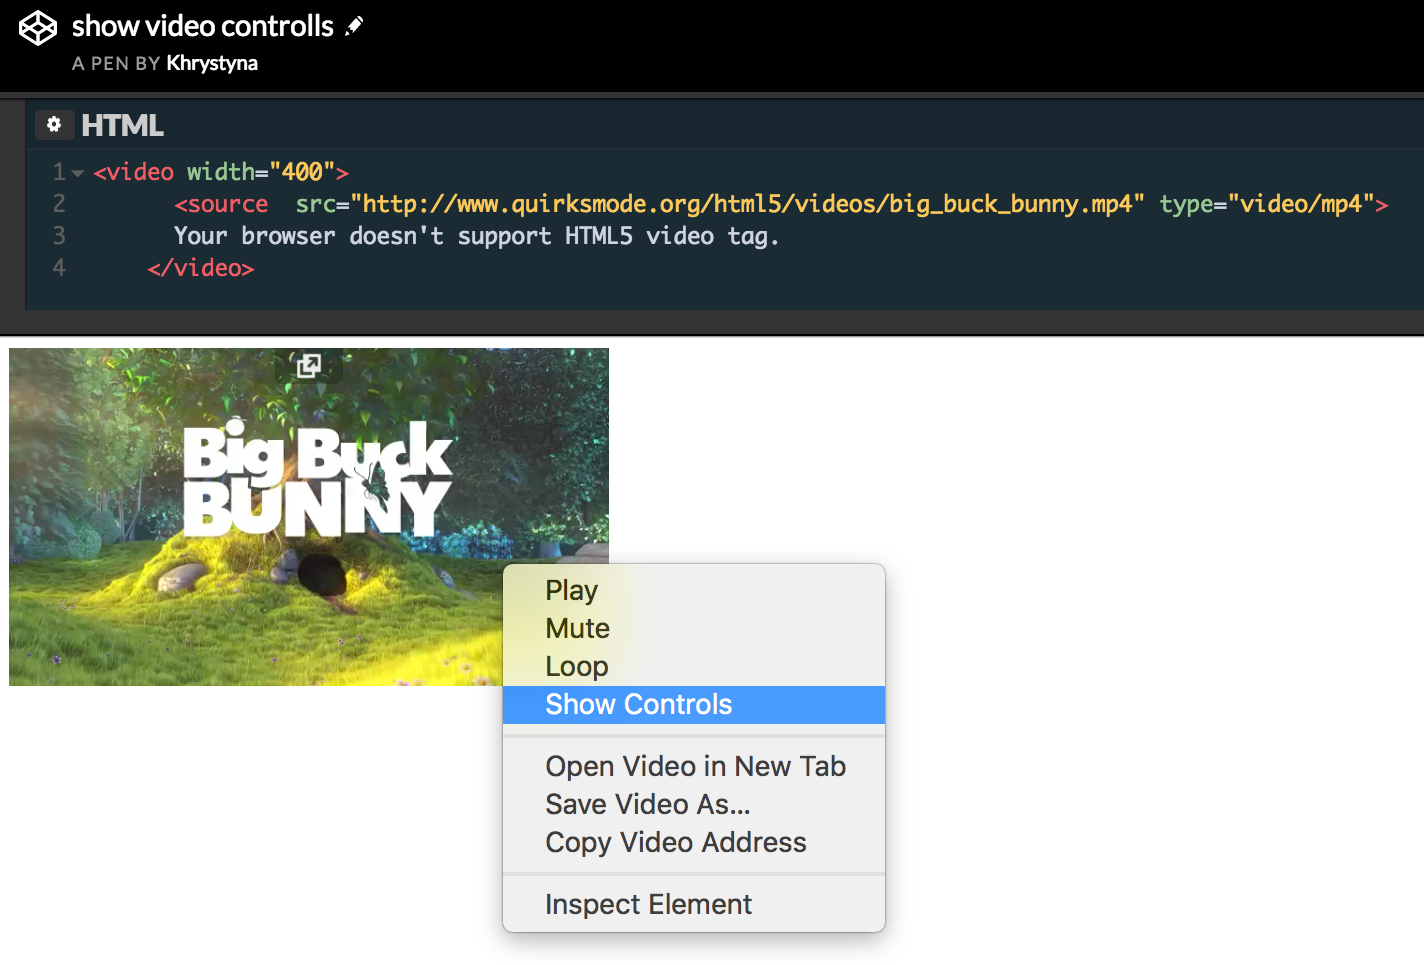 Using Context Menu To Show Video Controls And Manipulate Video Playback